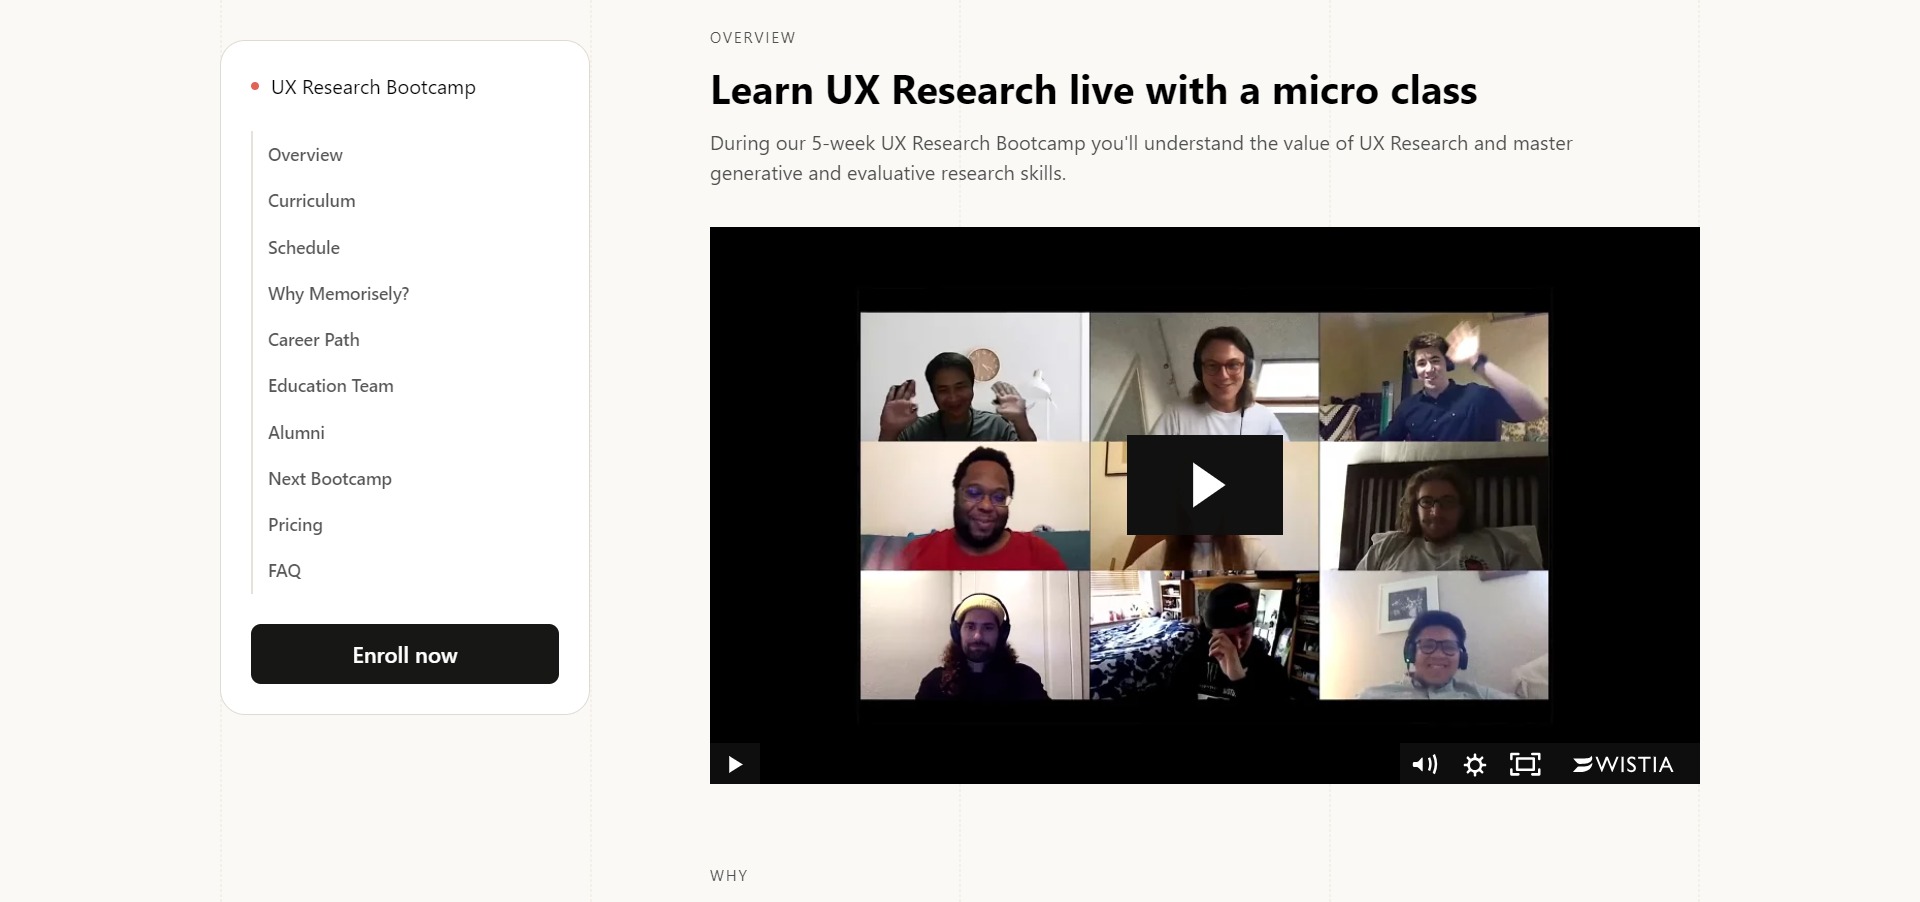 ux research bootcamp, memorizely